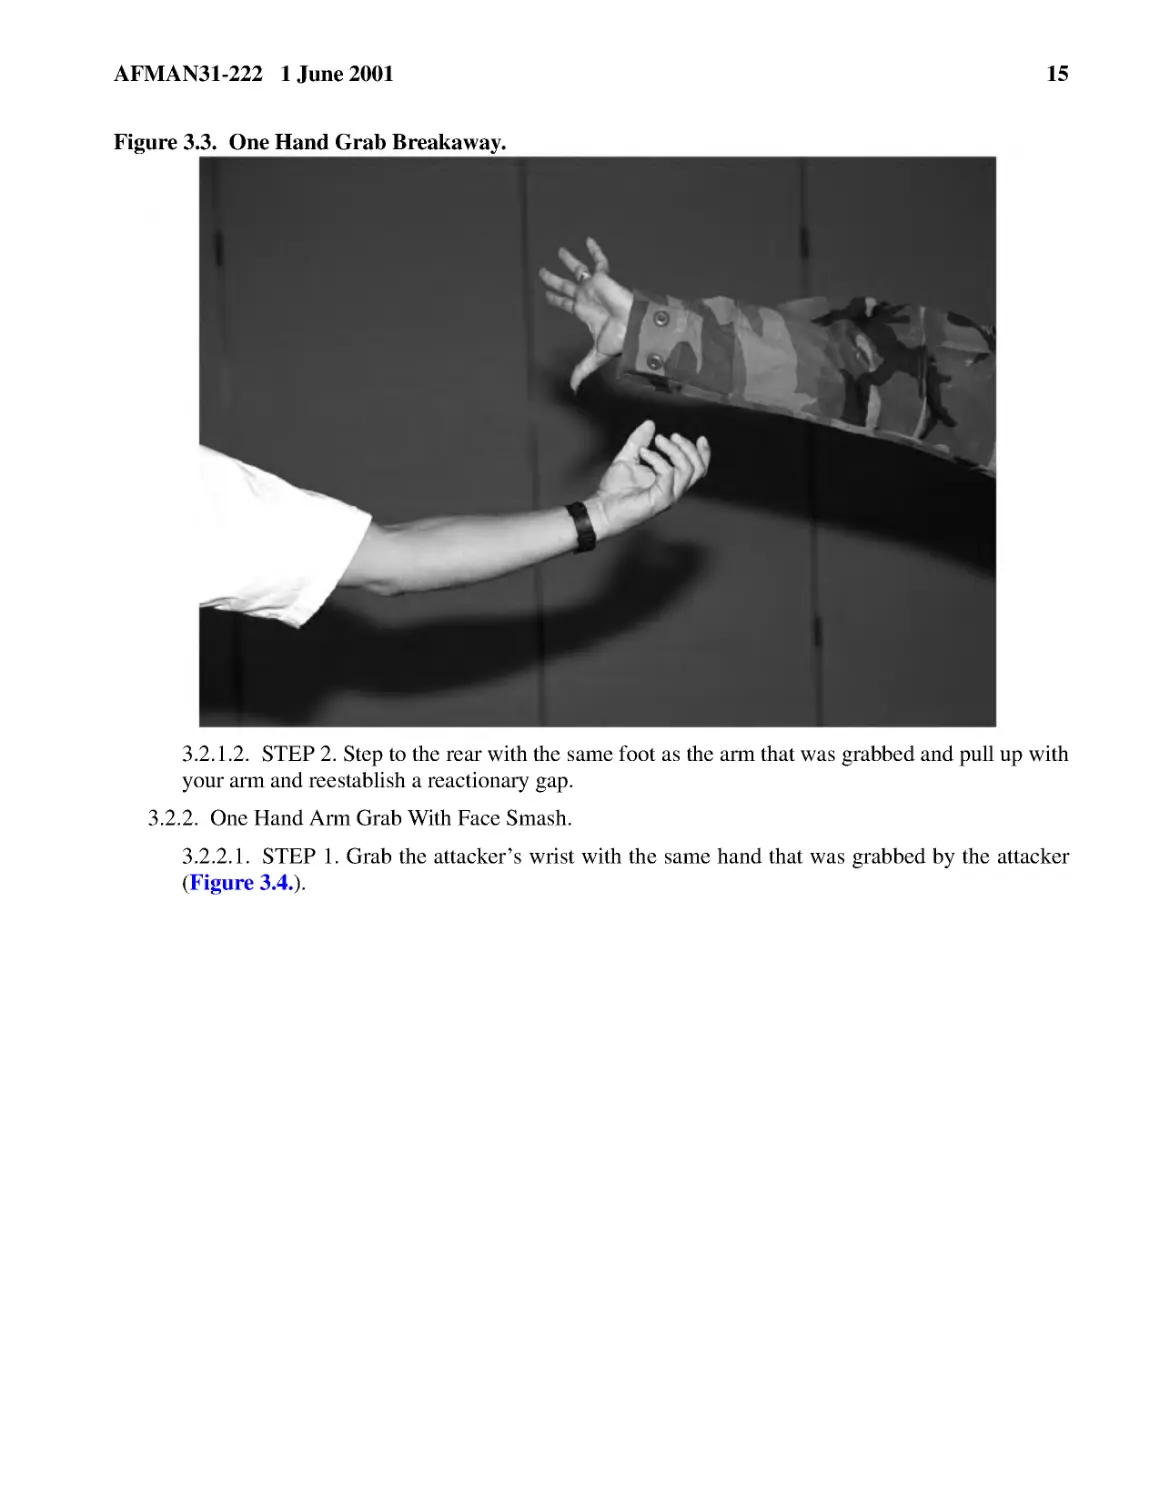 Figure 3.3.� One Hand Grab Breakaway.
3.2.1.2.� STEP 2. Step to the rear with the same foot as the arm that was grabbed and pull up wit...
3.2.2.� One Hand Arm Grab With Face Smash.